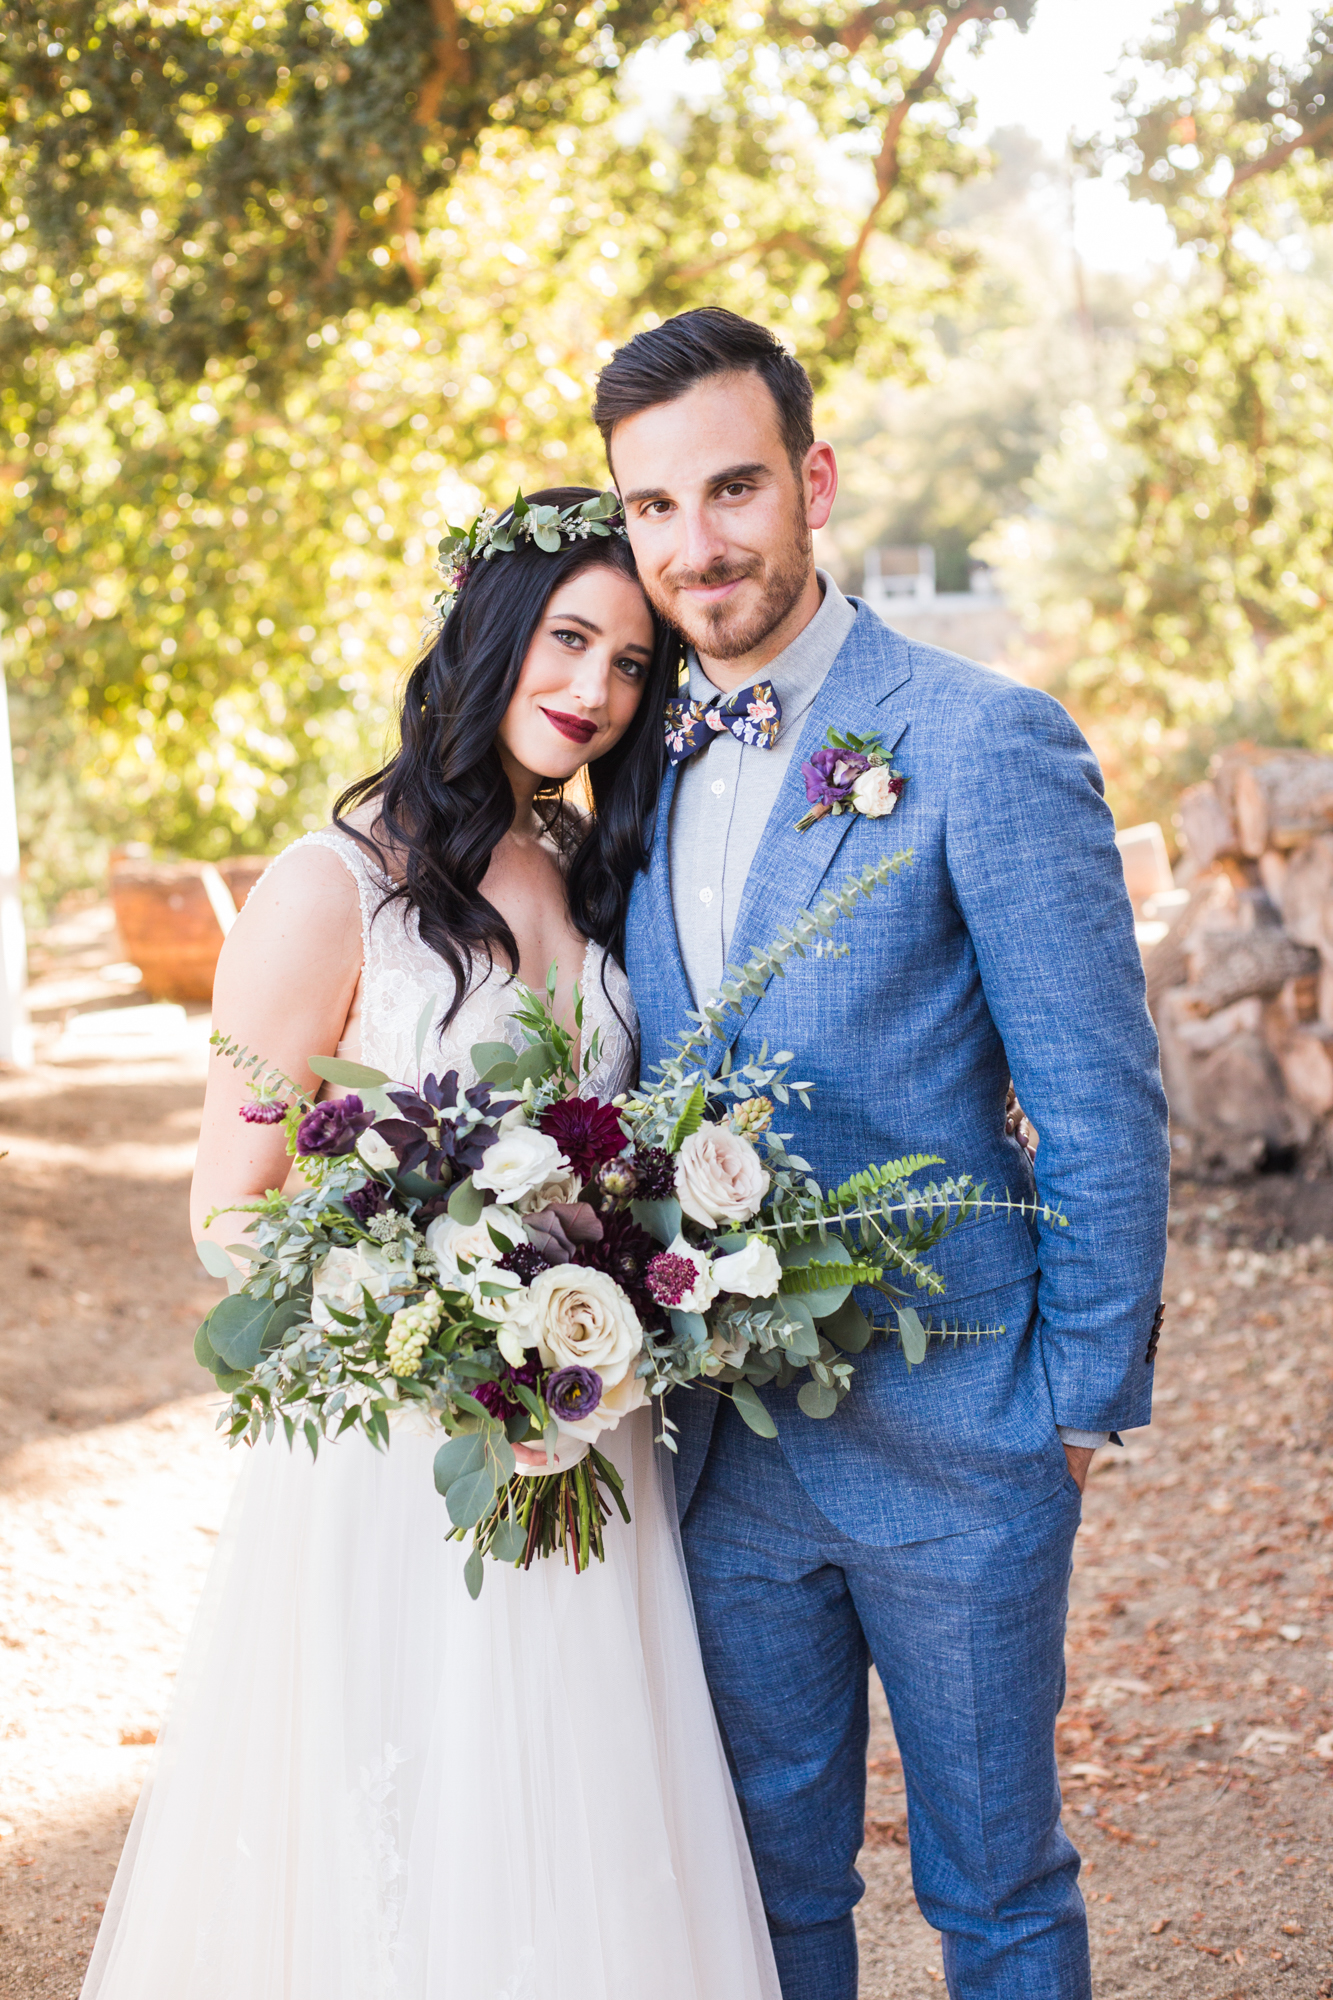 Rustic and Moody bride and groom with dark florals